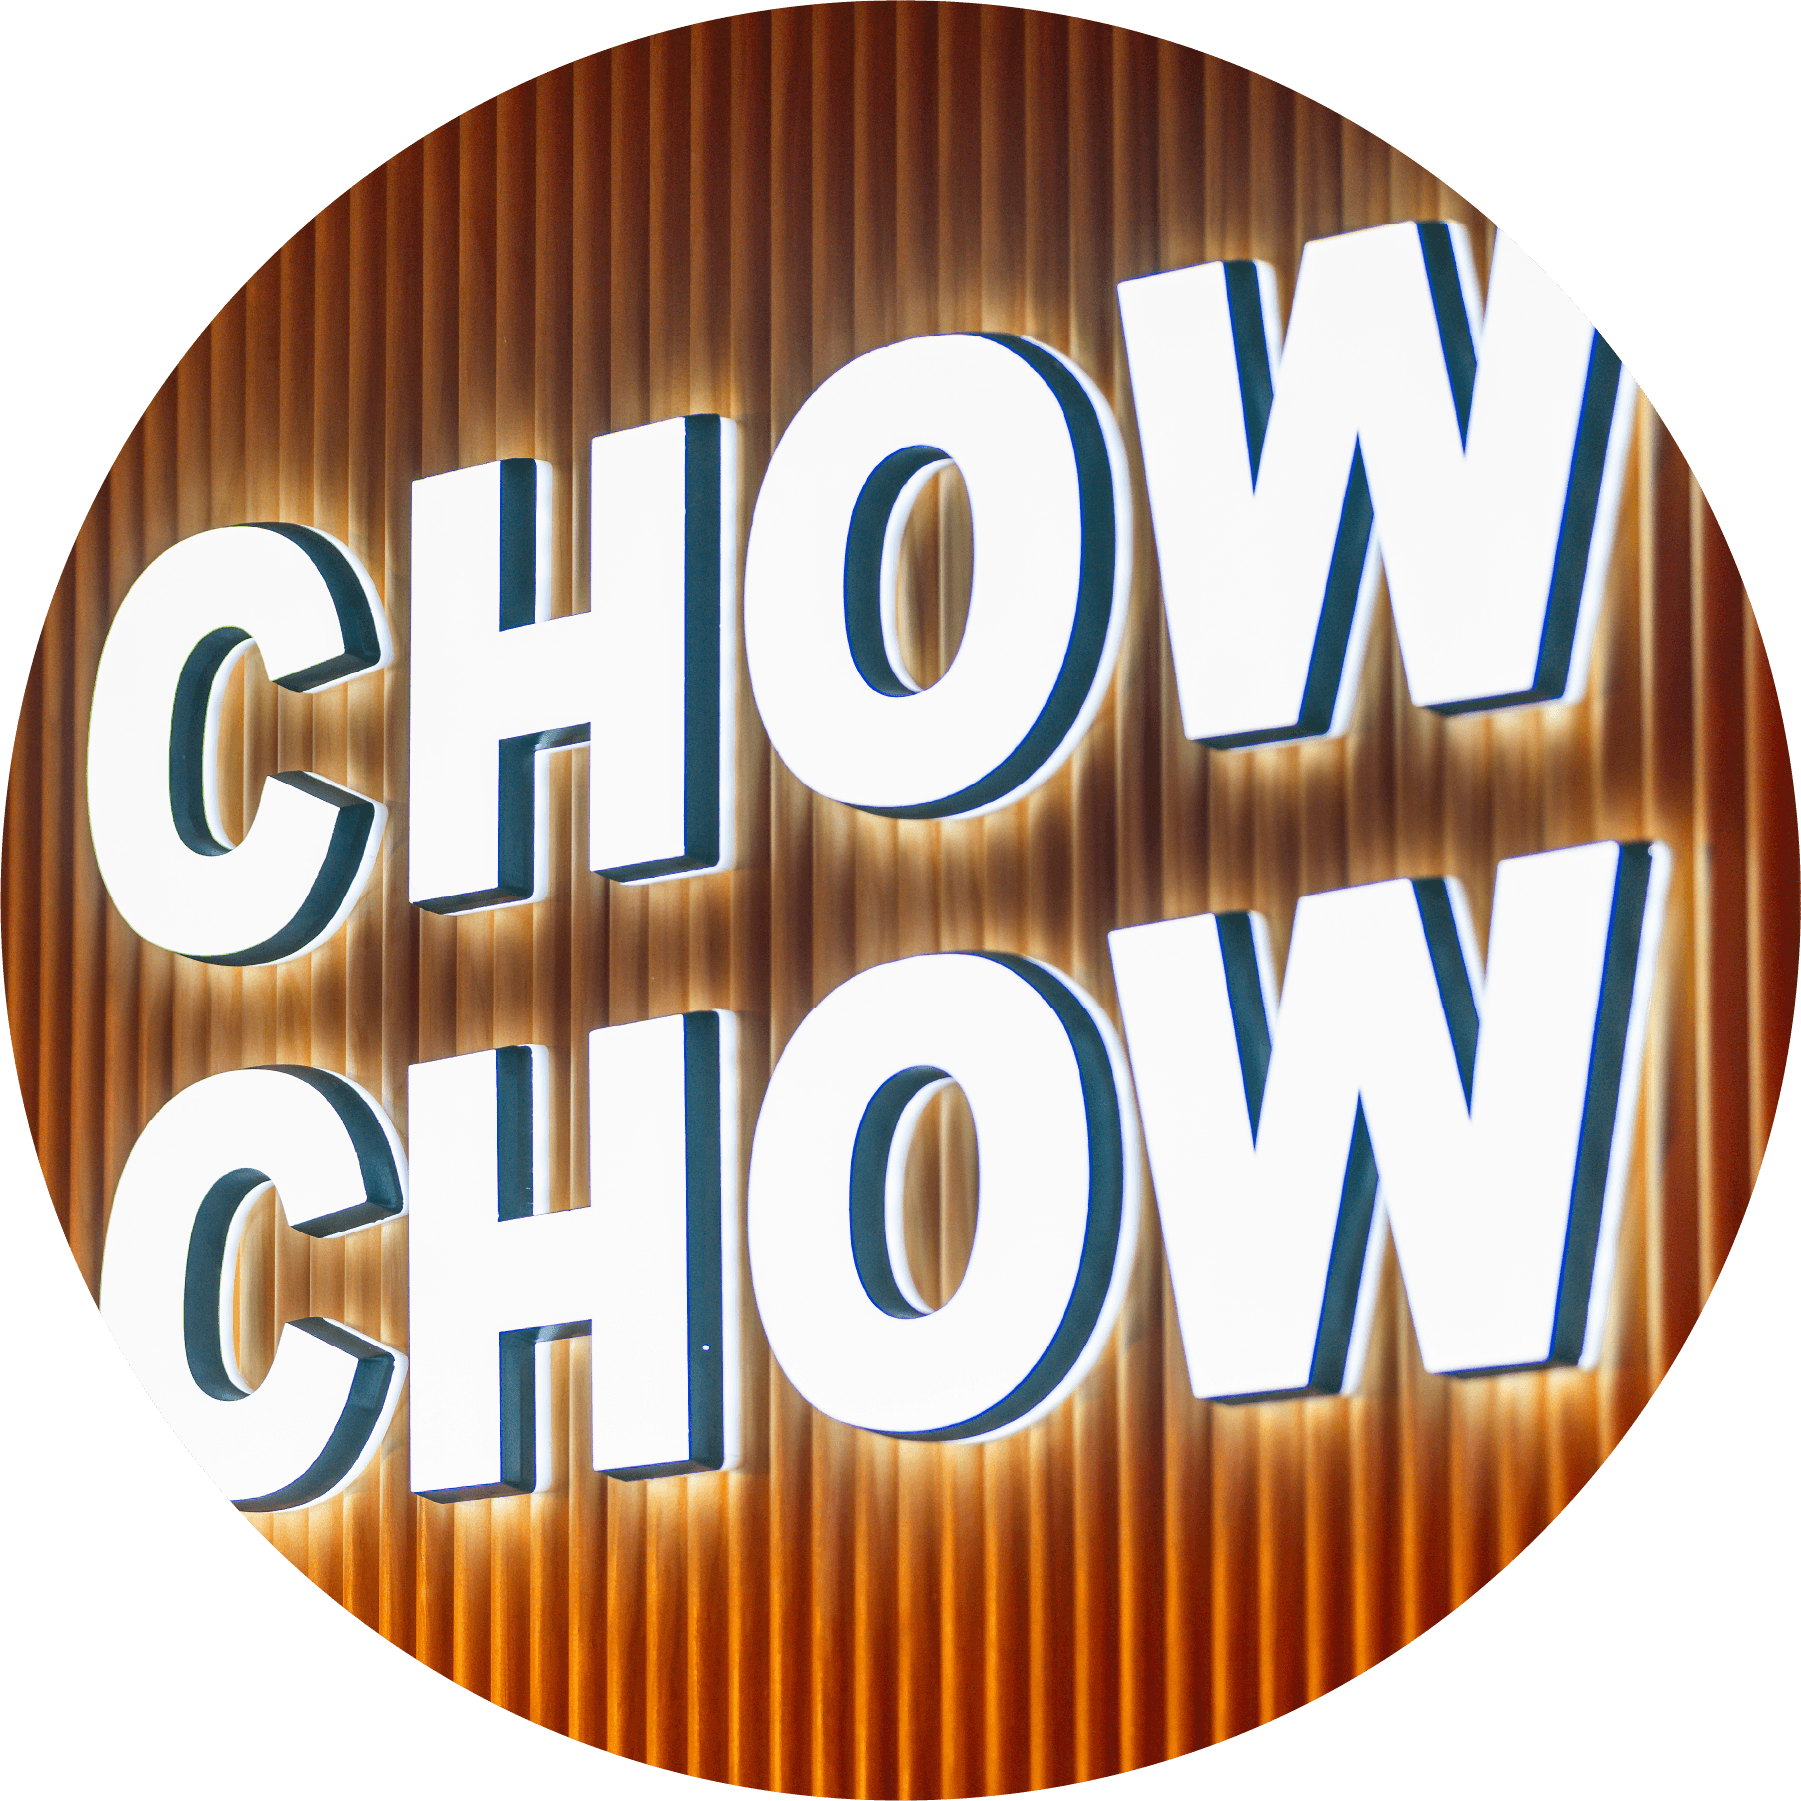 Post Office Square | Chow Chow bringing Chinese and Taiwanese flavours to Post Office Square